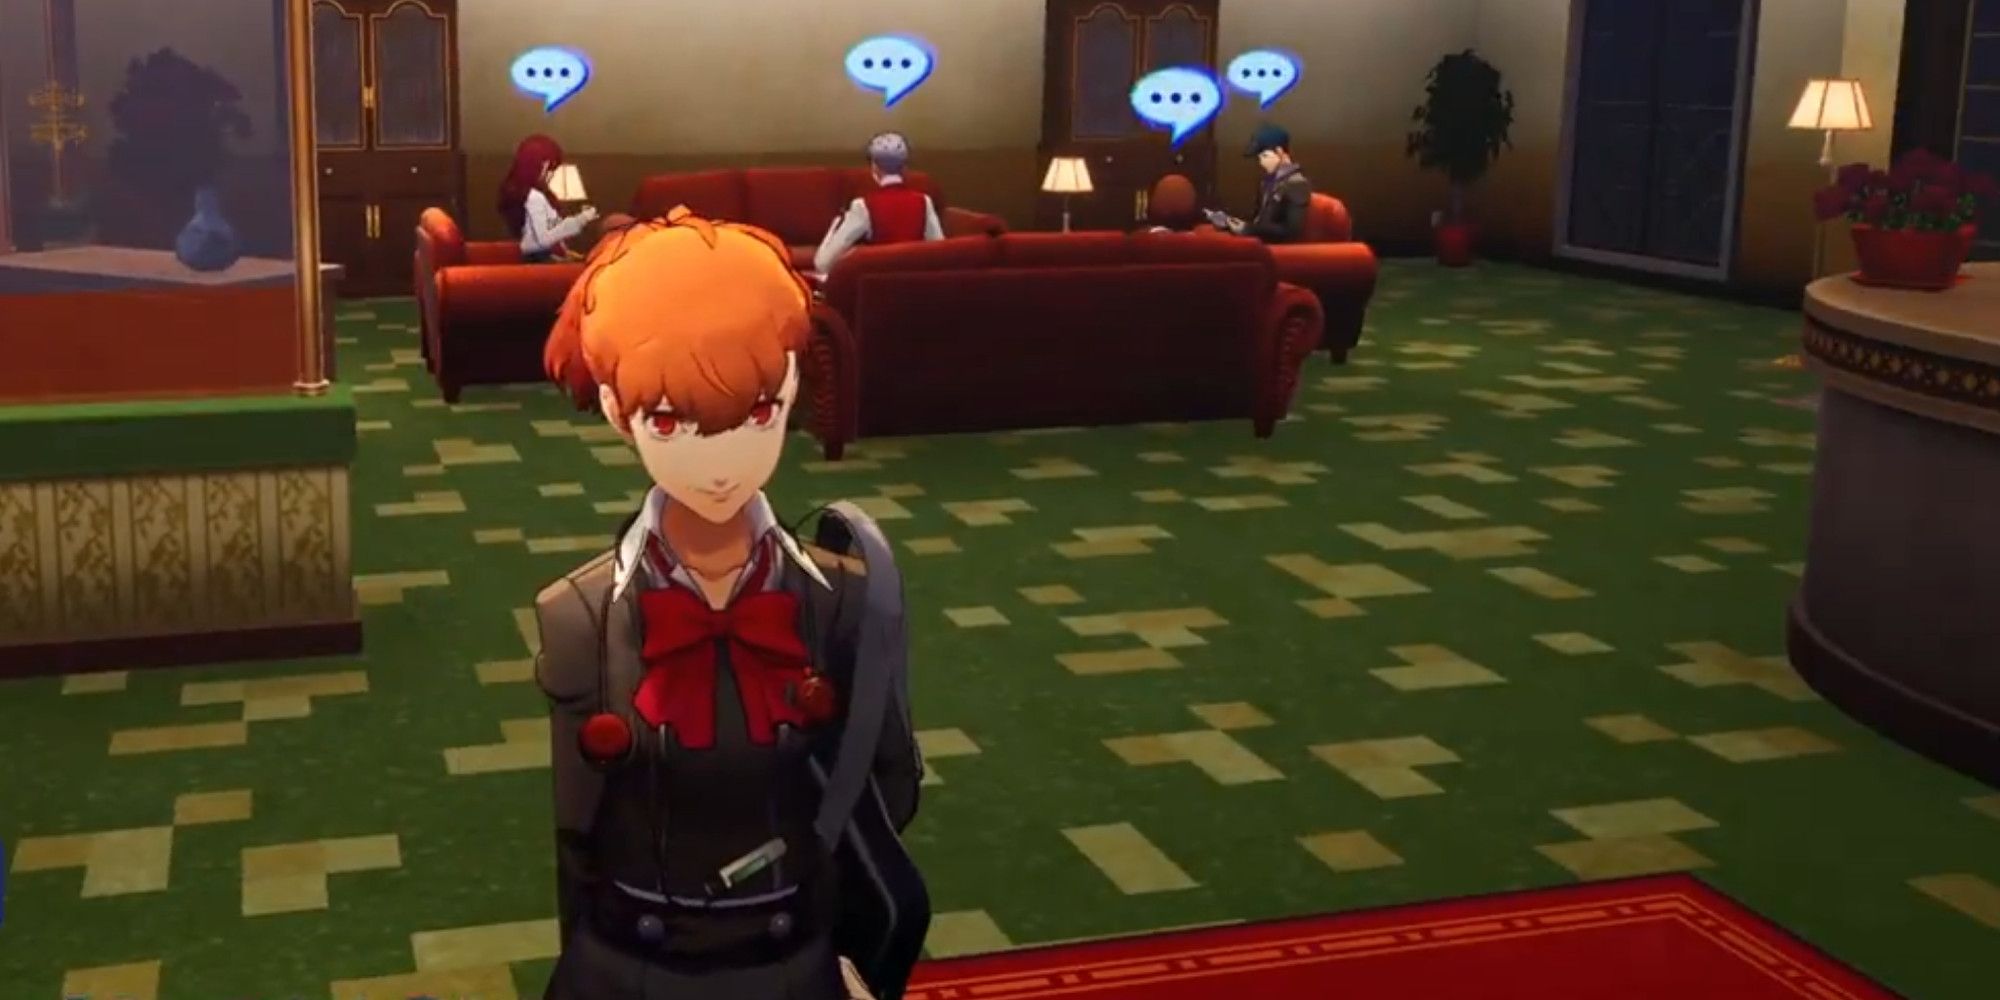 Kotone from persona 3 stood in the hallway of a dormitory with Mitsuru, Akihiko, Ken, and Junpei sat in the background in persona 3 Reload